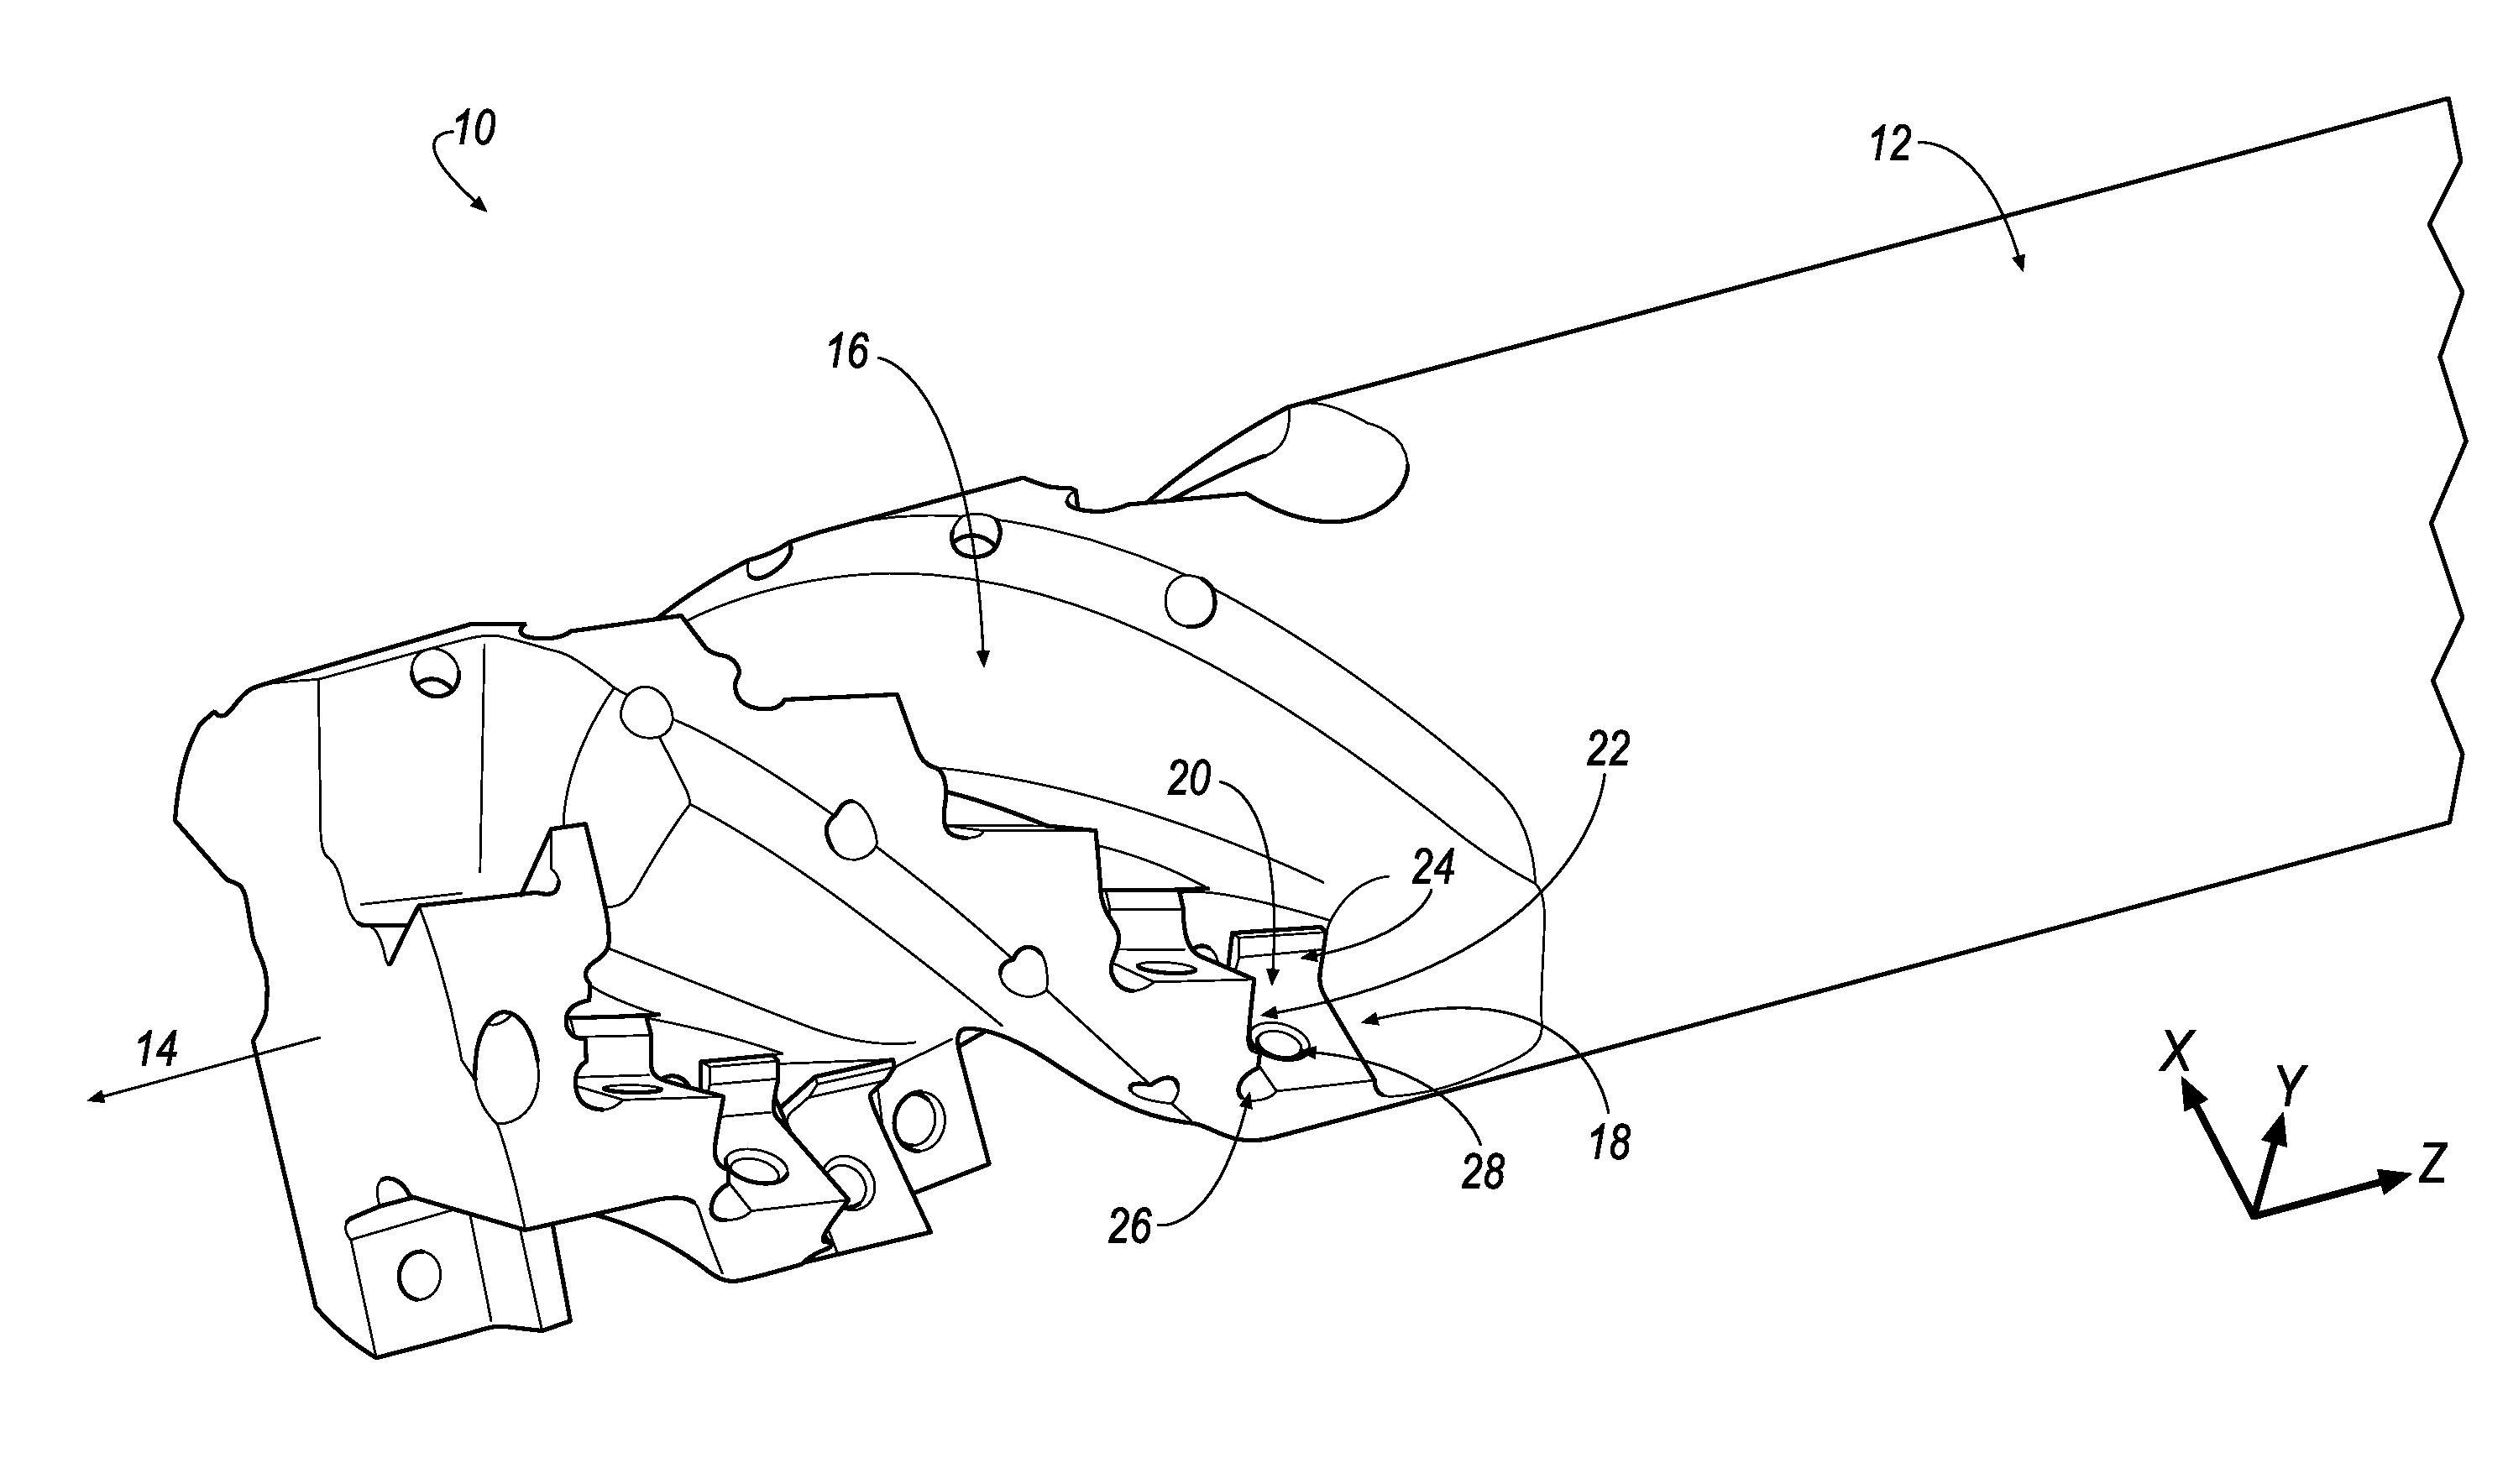 Cutting tool with pocket feature for reducing stress